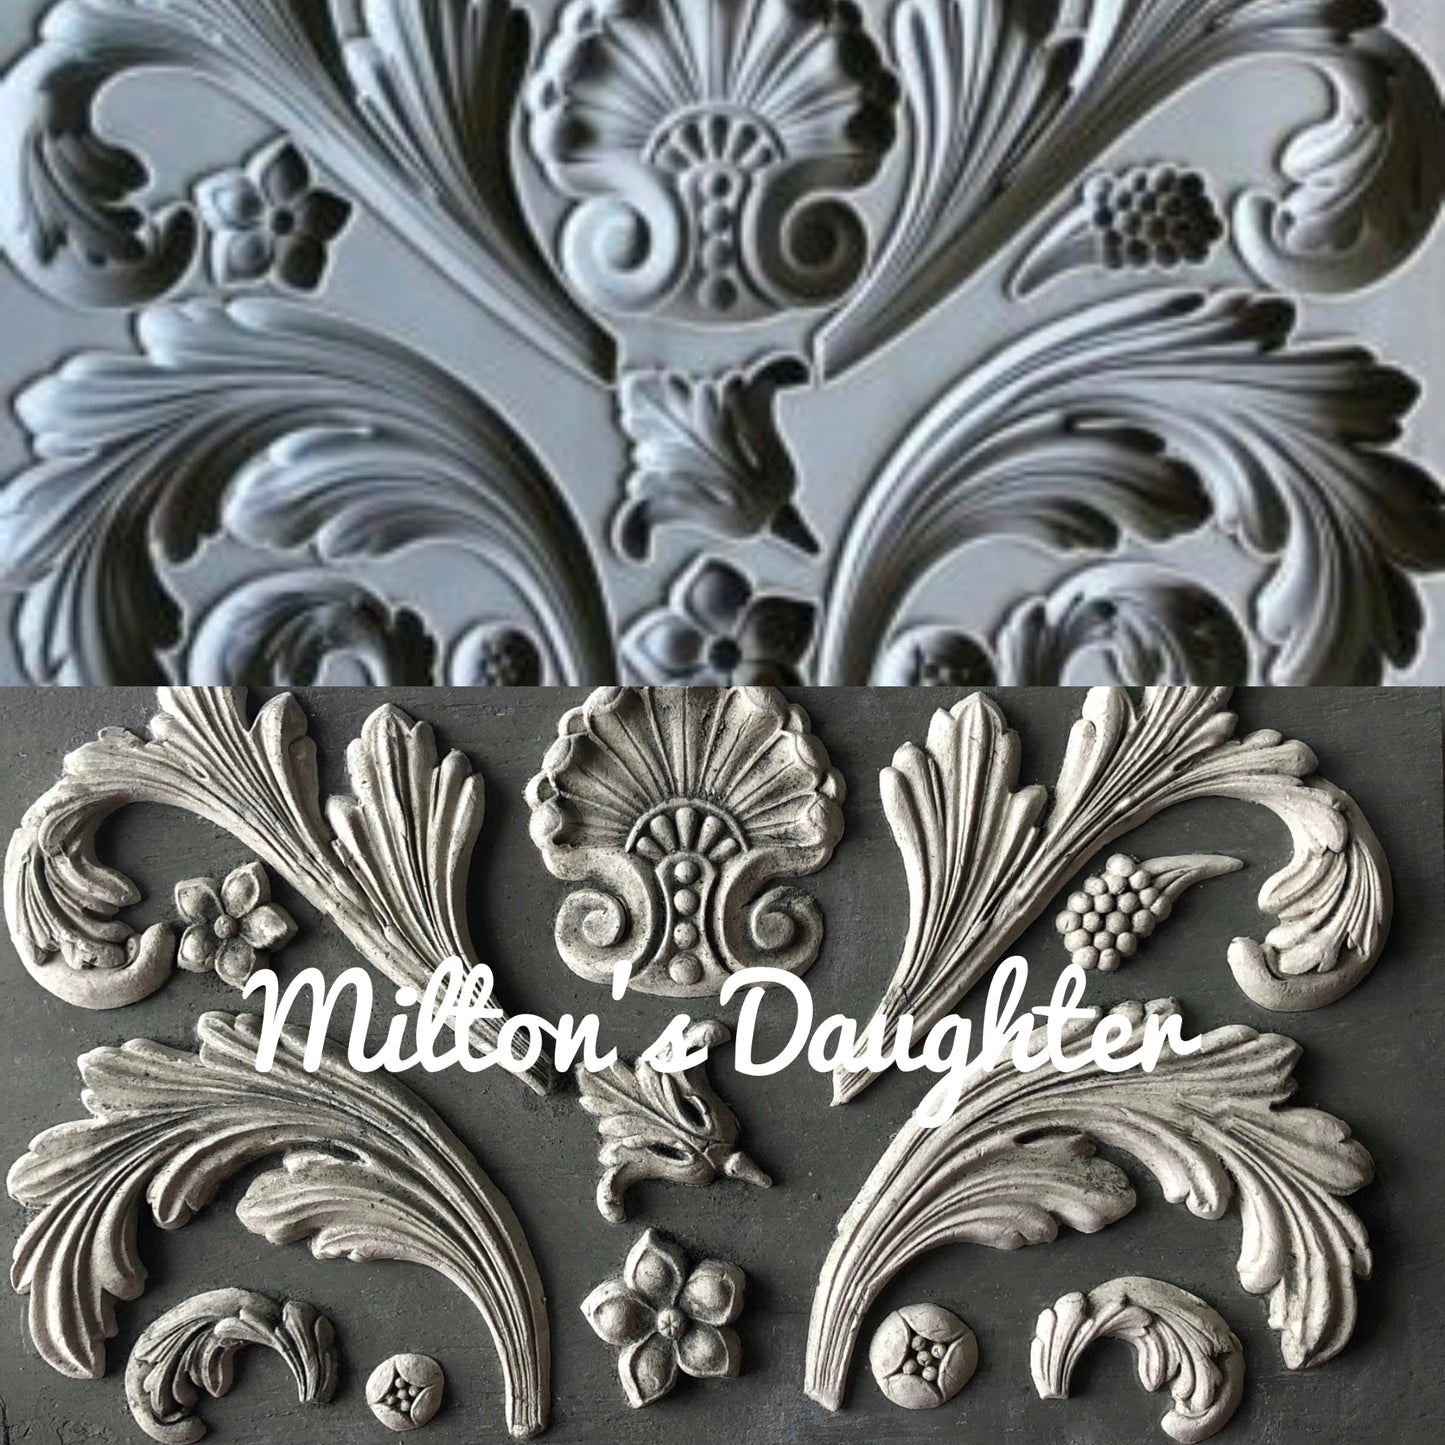 Acanthus Scroll mold by IOD mold and castings side by side greyscale at Milton's Daughter